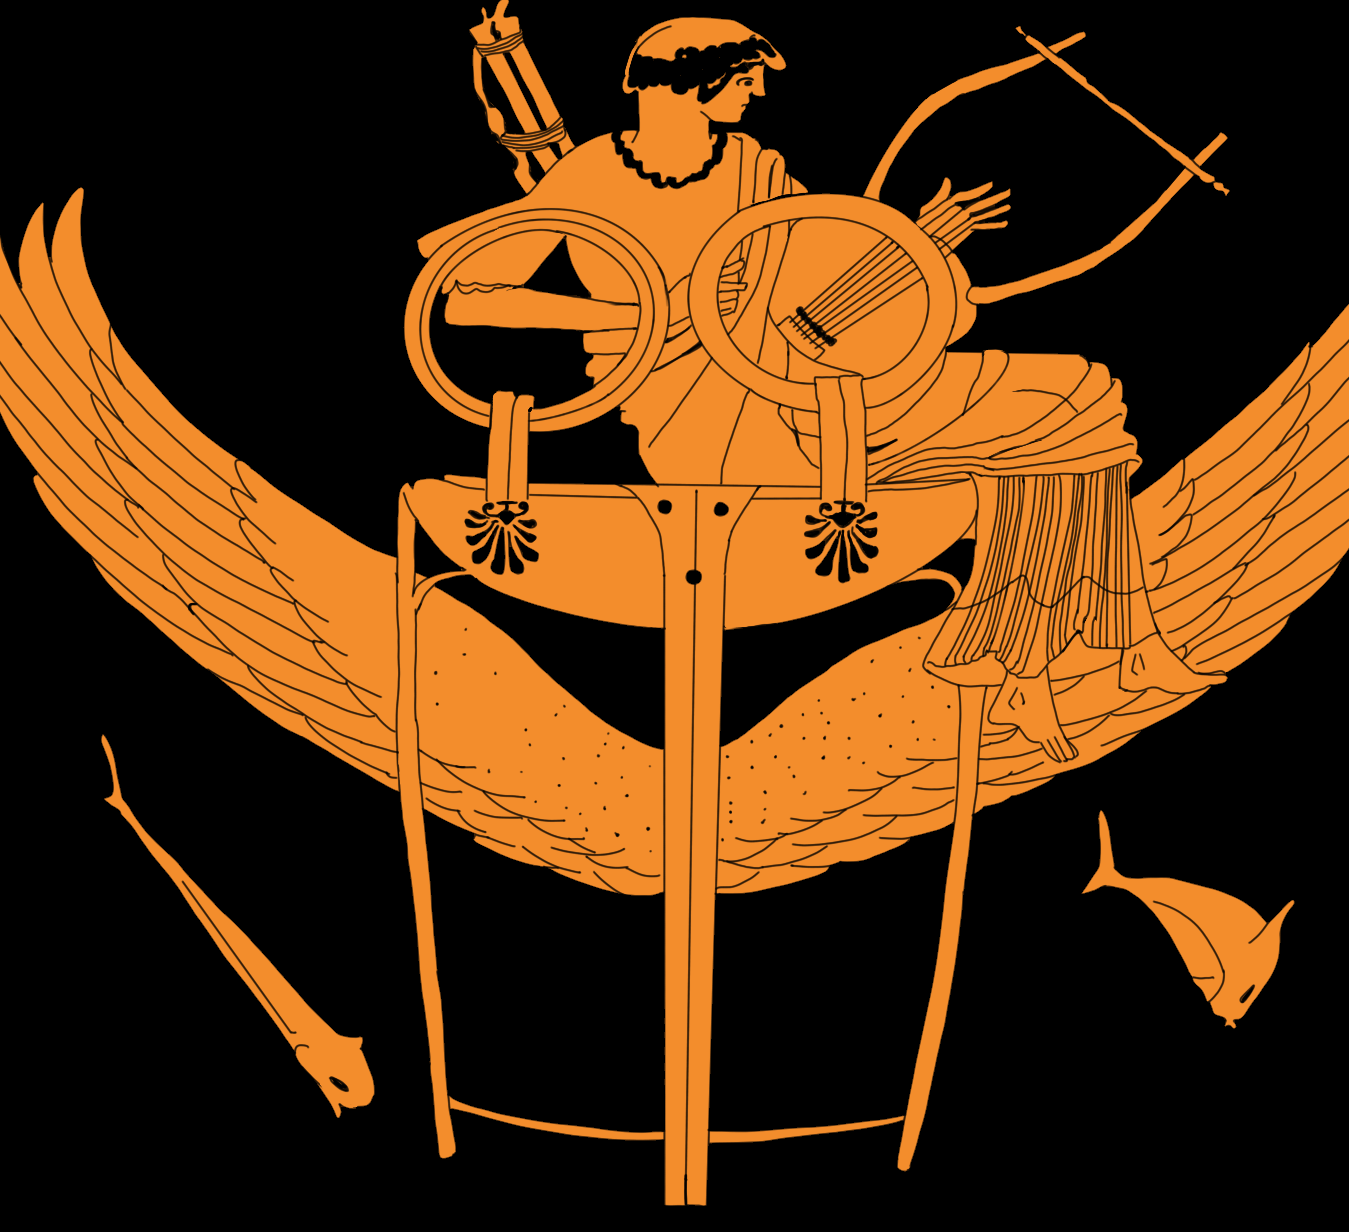 Apollo sits on a winged tripod. He is holding a lyre, and has a bow and quiver strung over his back. Below him, dolphins leap from the sea.